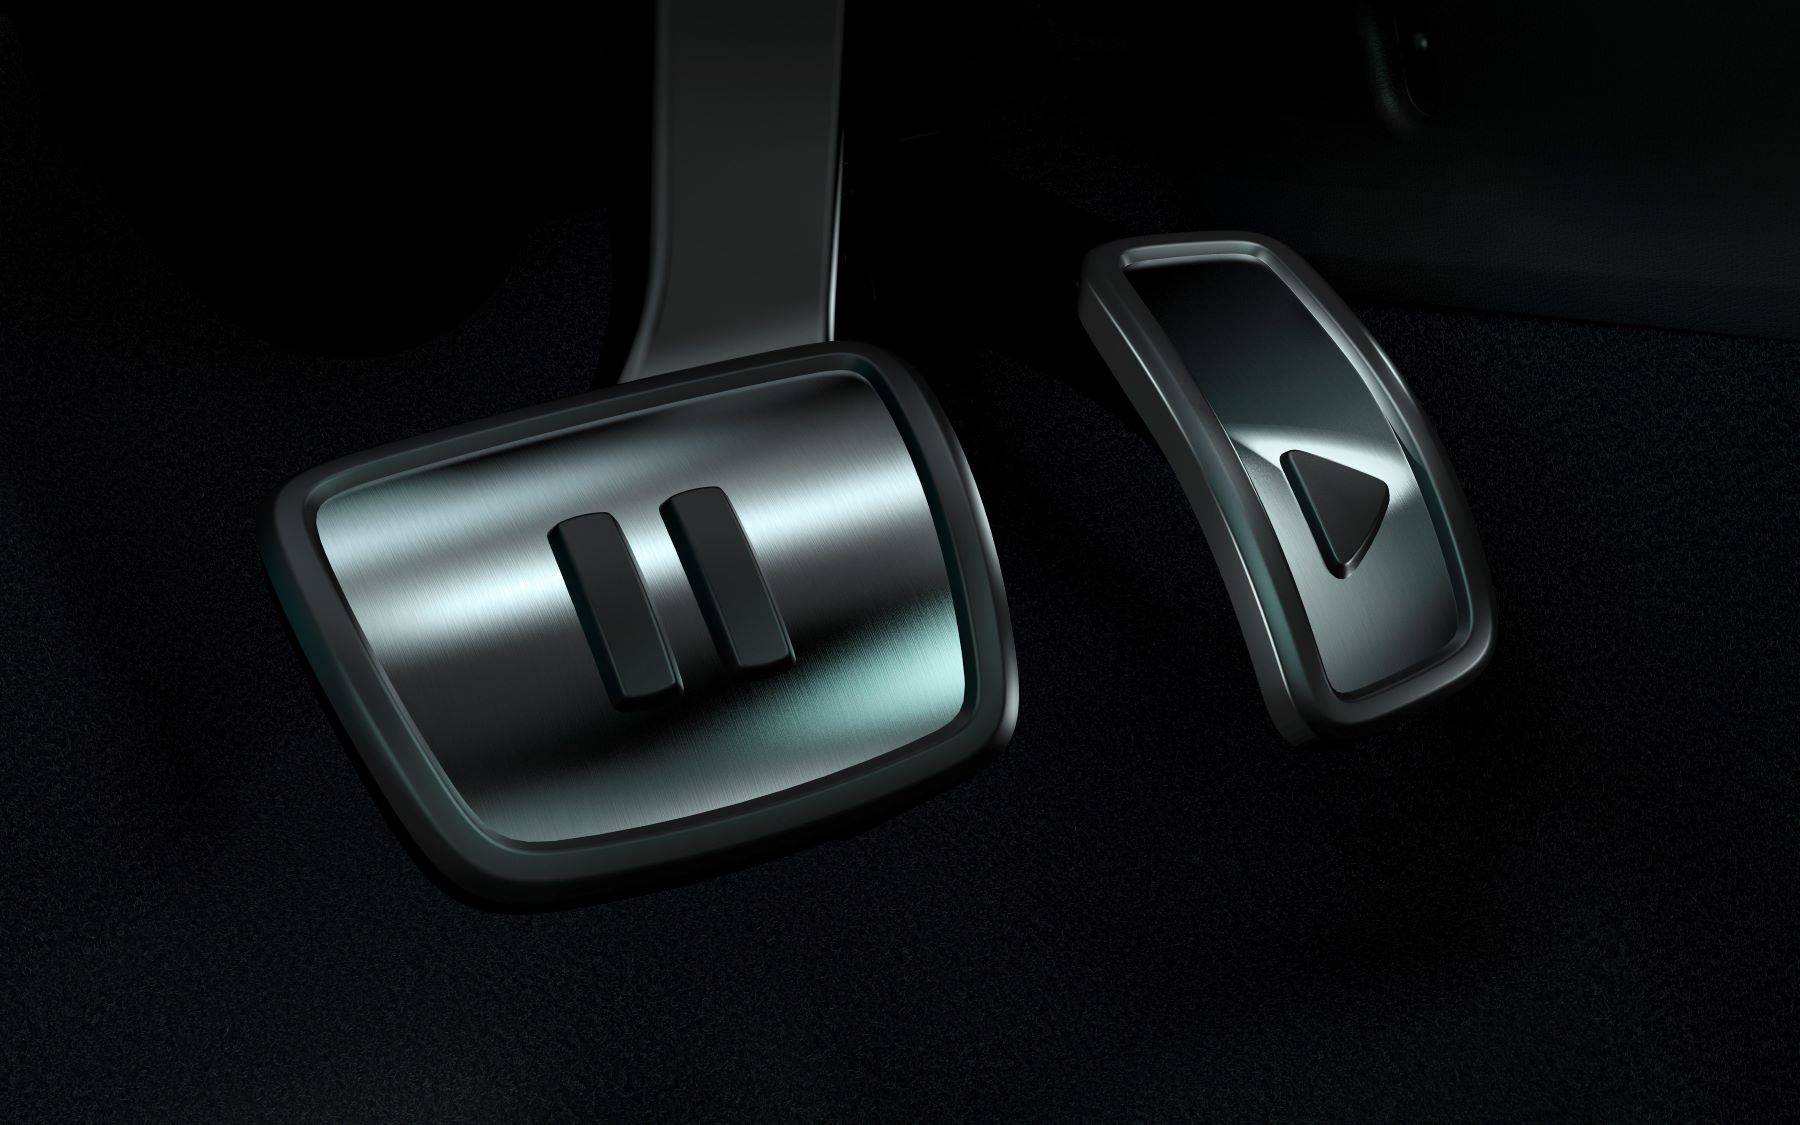 2021 Volkswagen ID.4 pedals with 'Pause' and 'Play' symbols